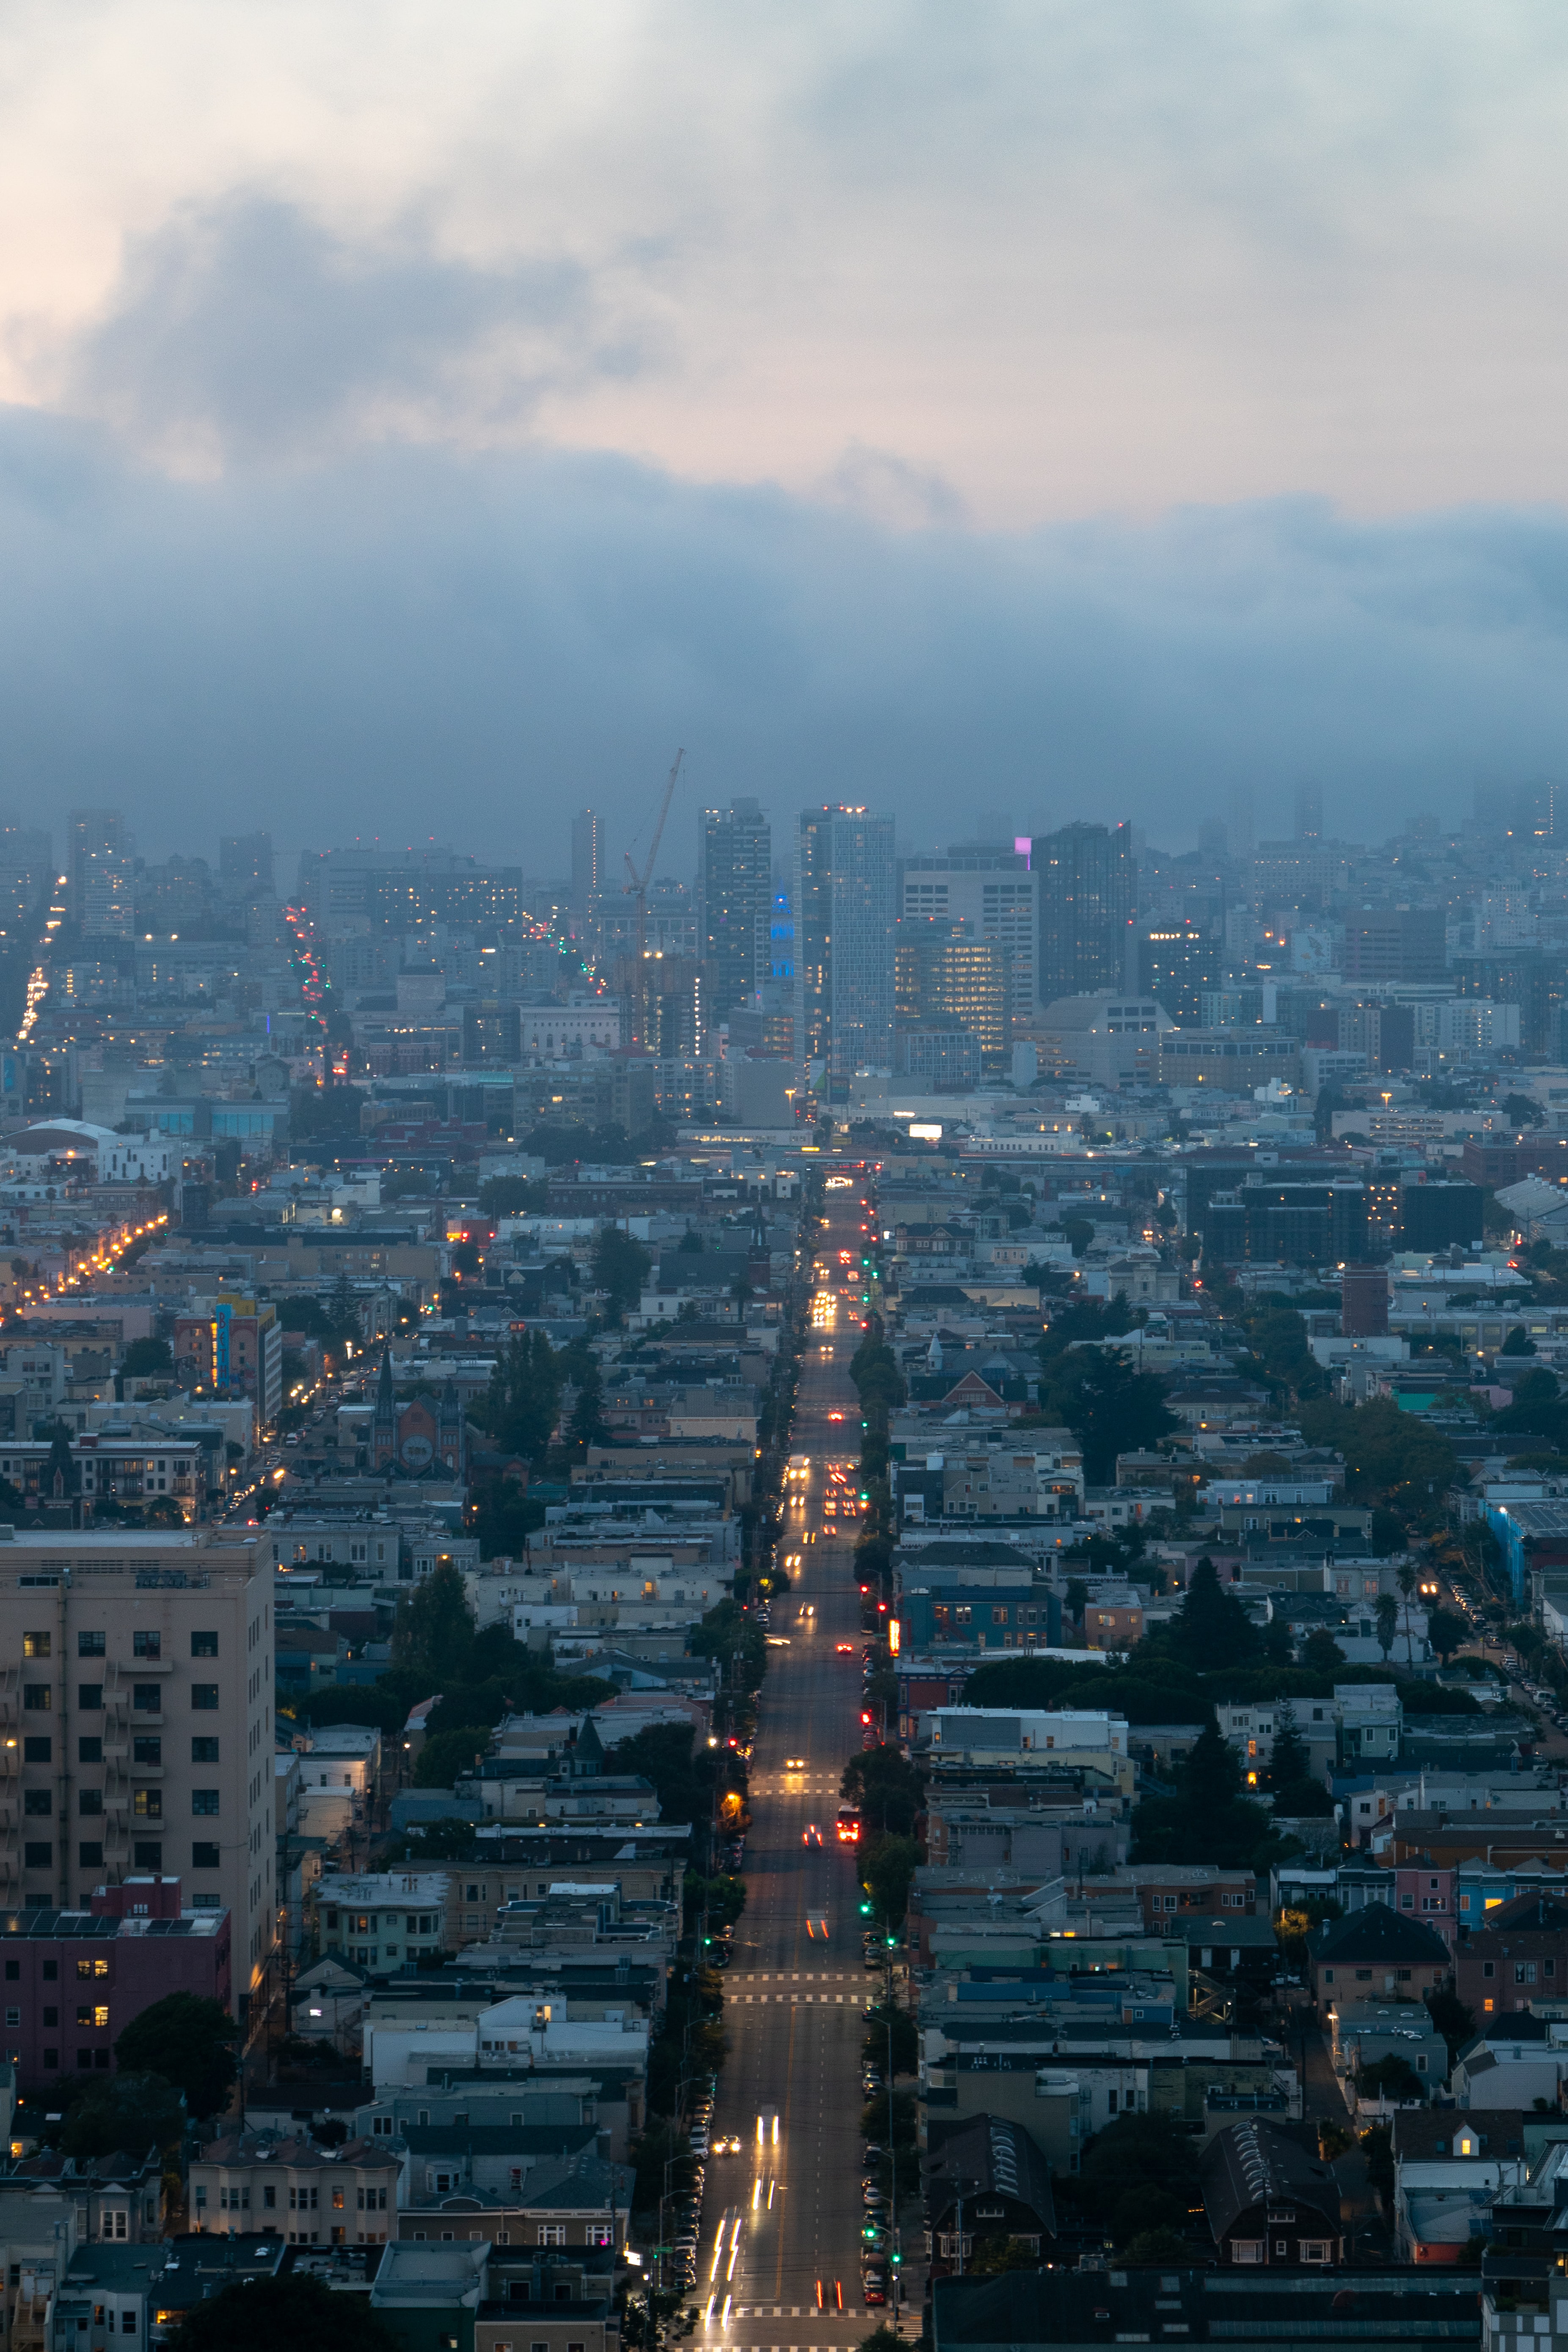 Wallpaper Full HD street, cities, city, building, view from above, fog